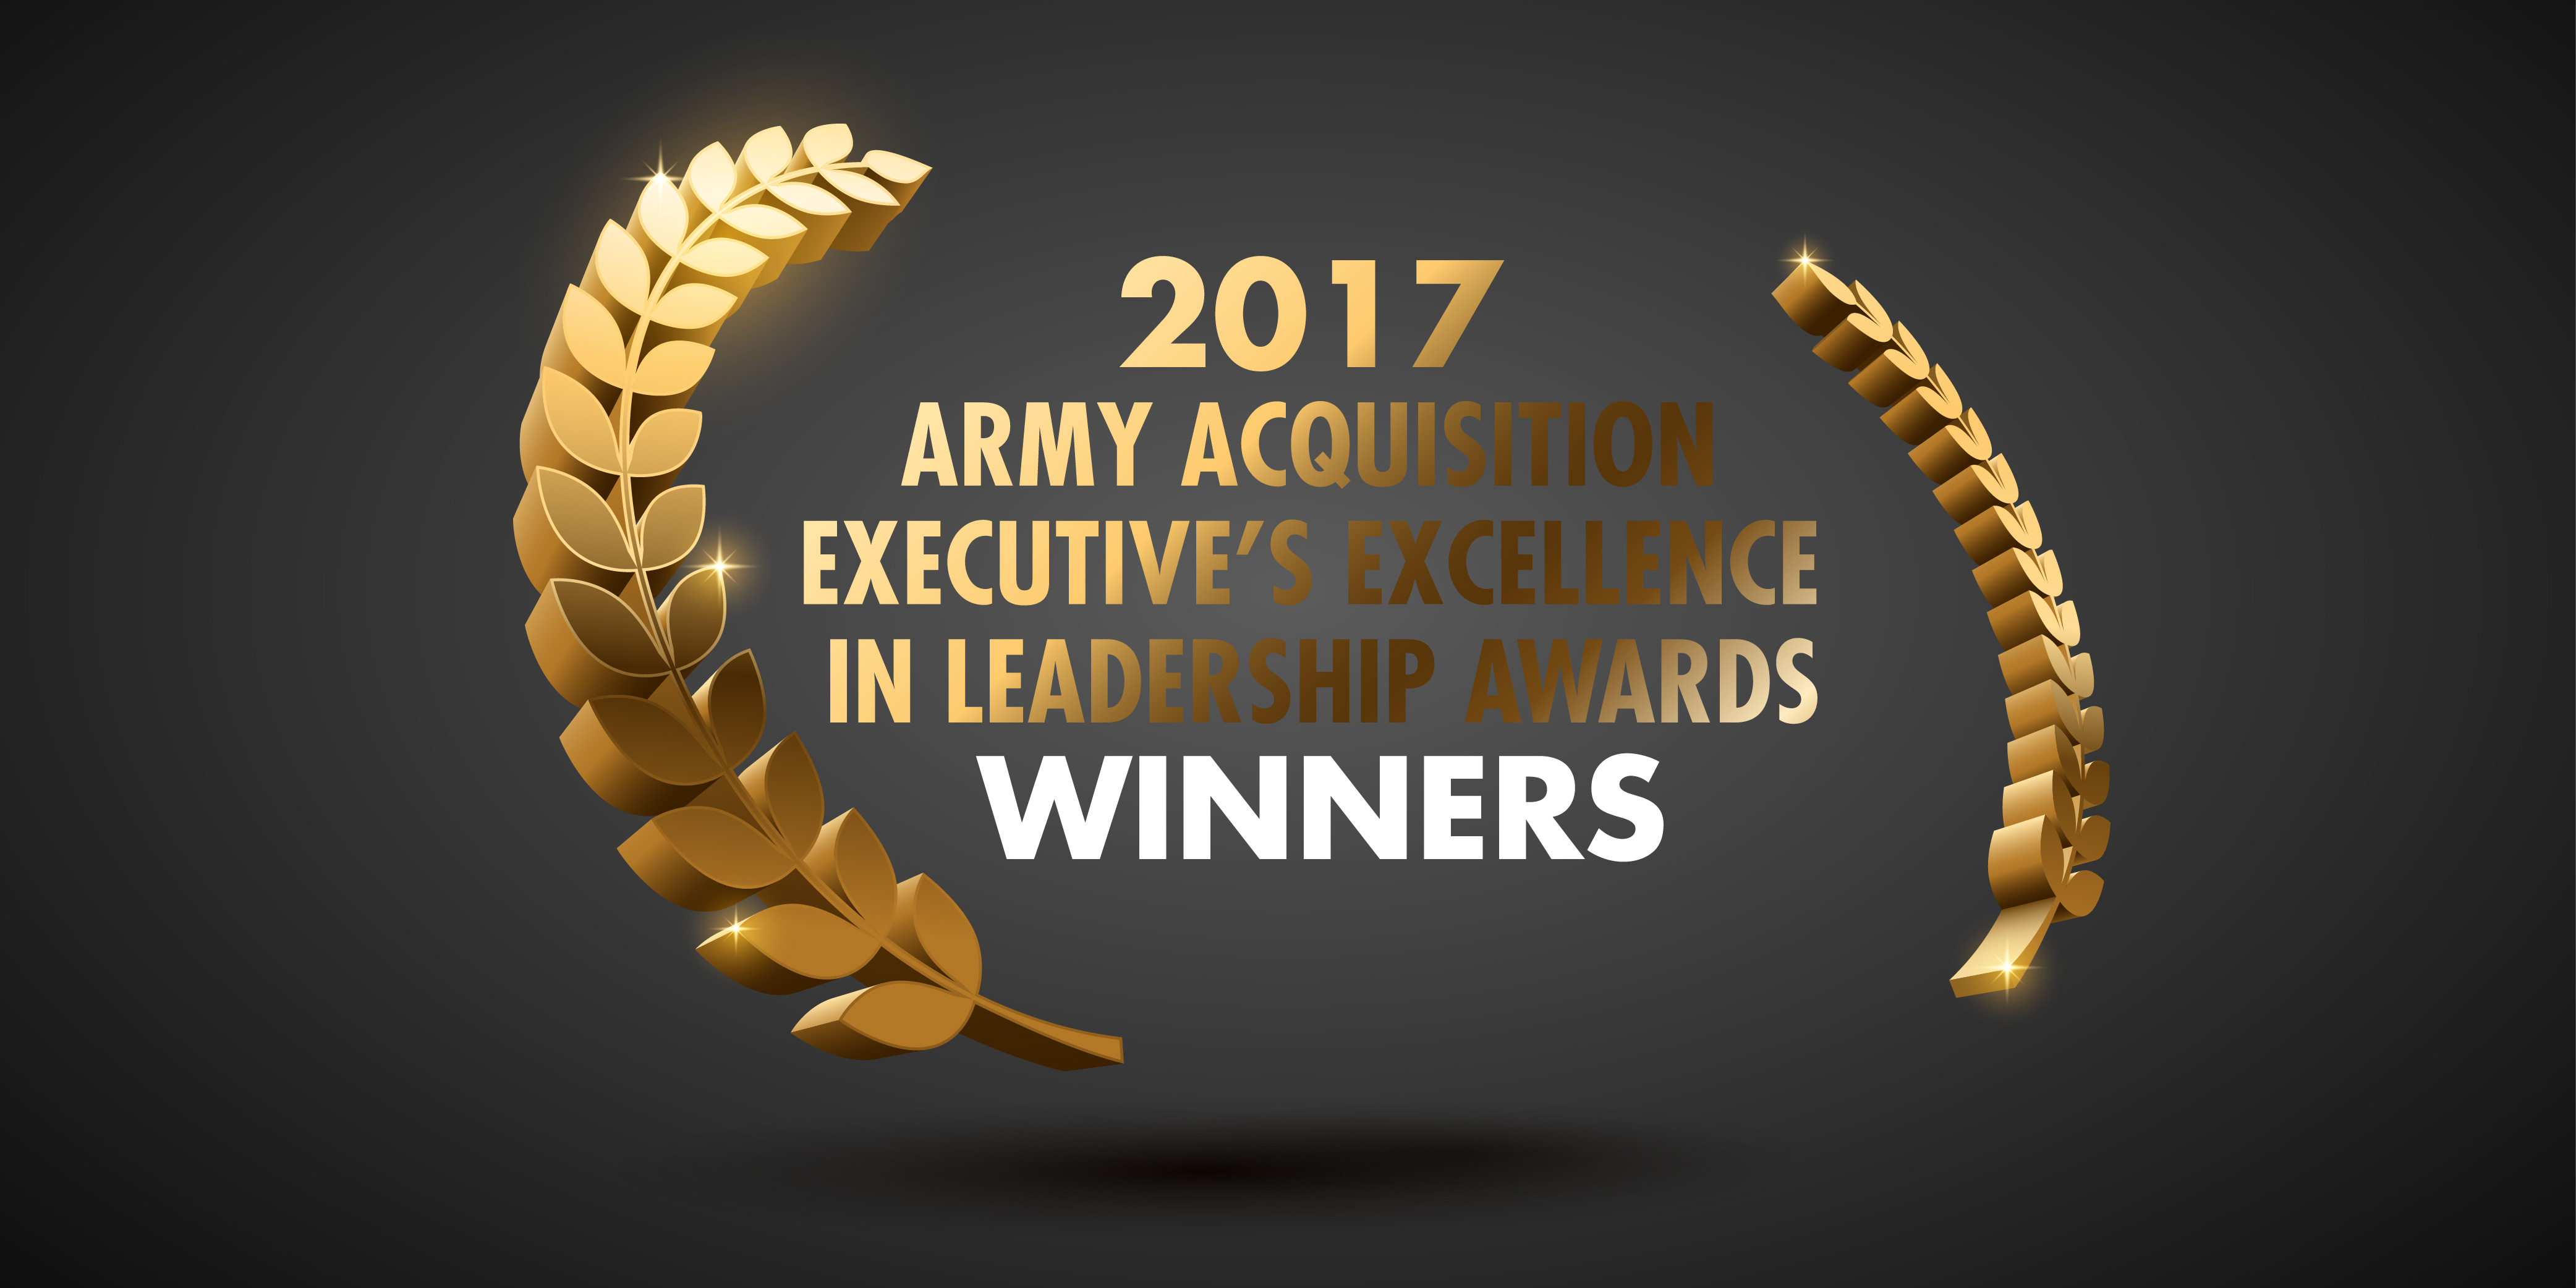 2017 Army acquisition award winners